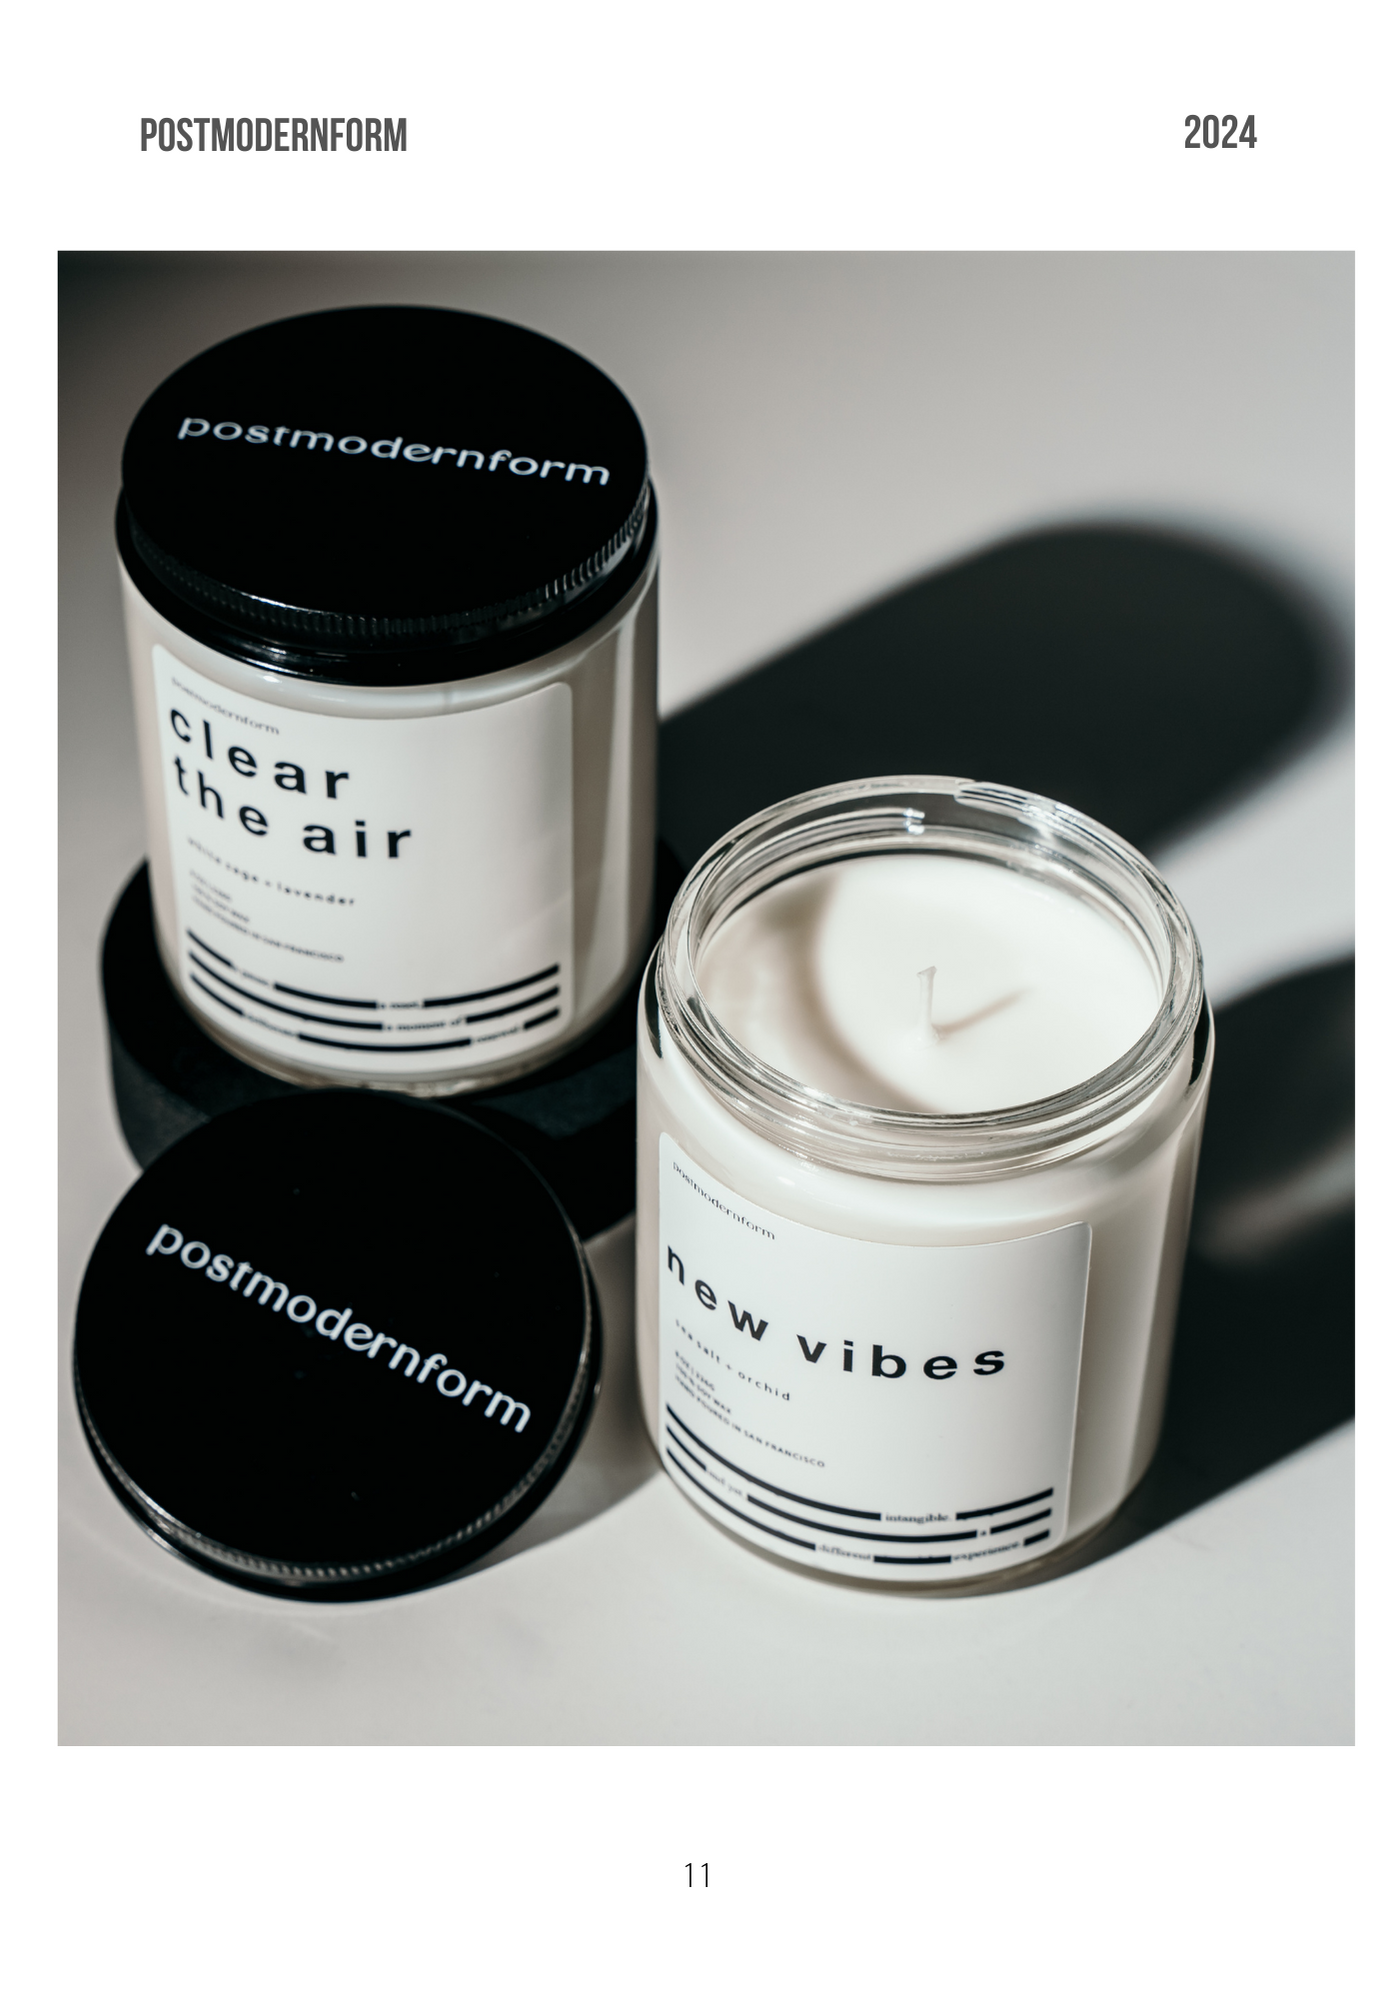 postmodernform lookbook clear the air candle new vibes candle